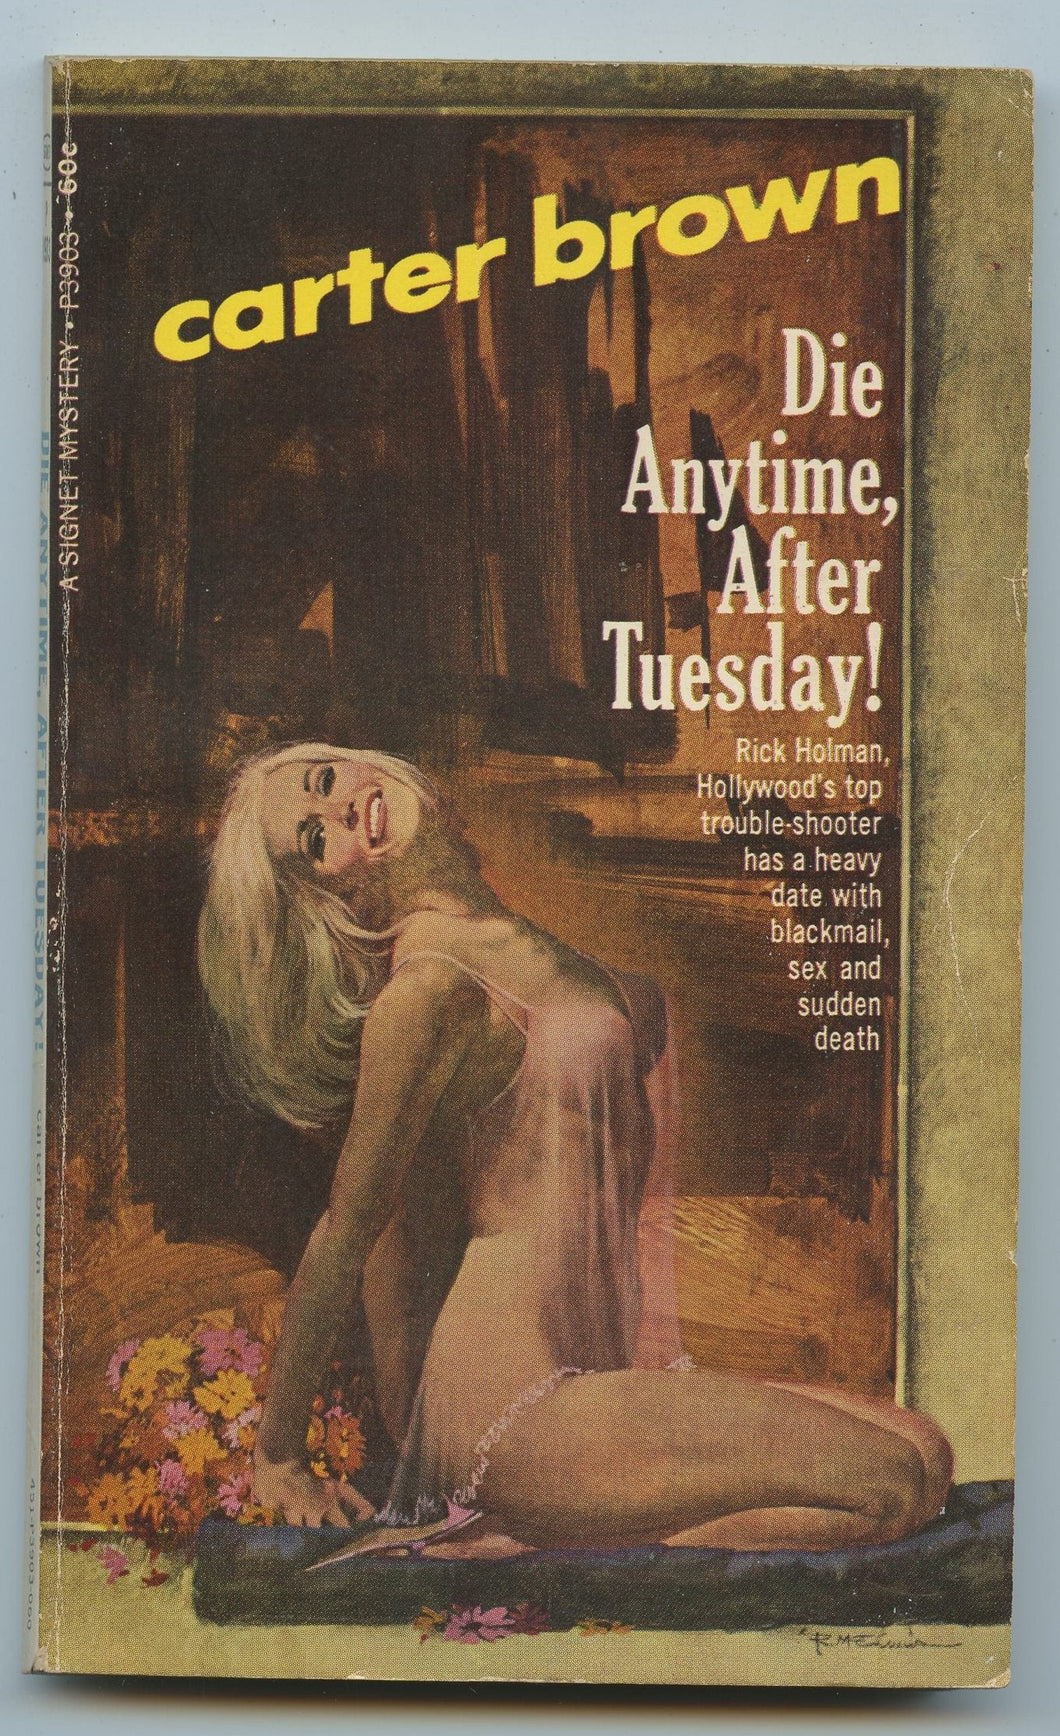 Die Anytime, After Tuesday!